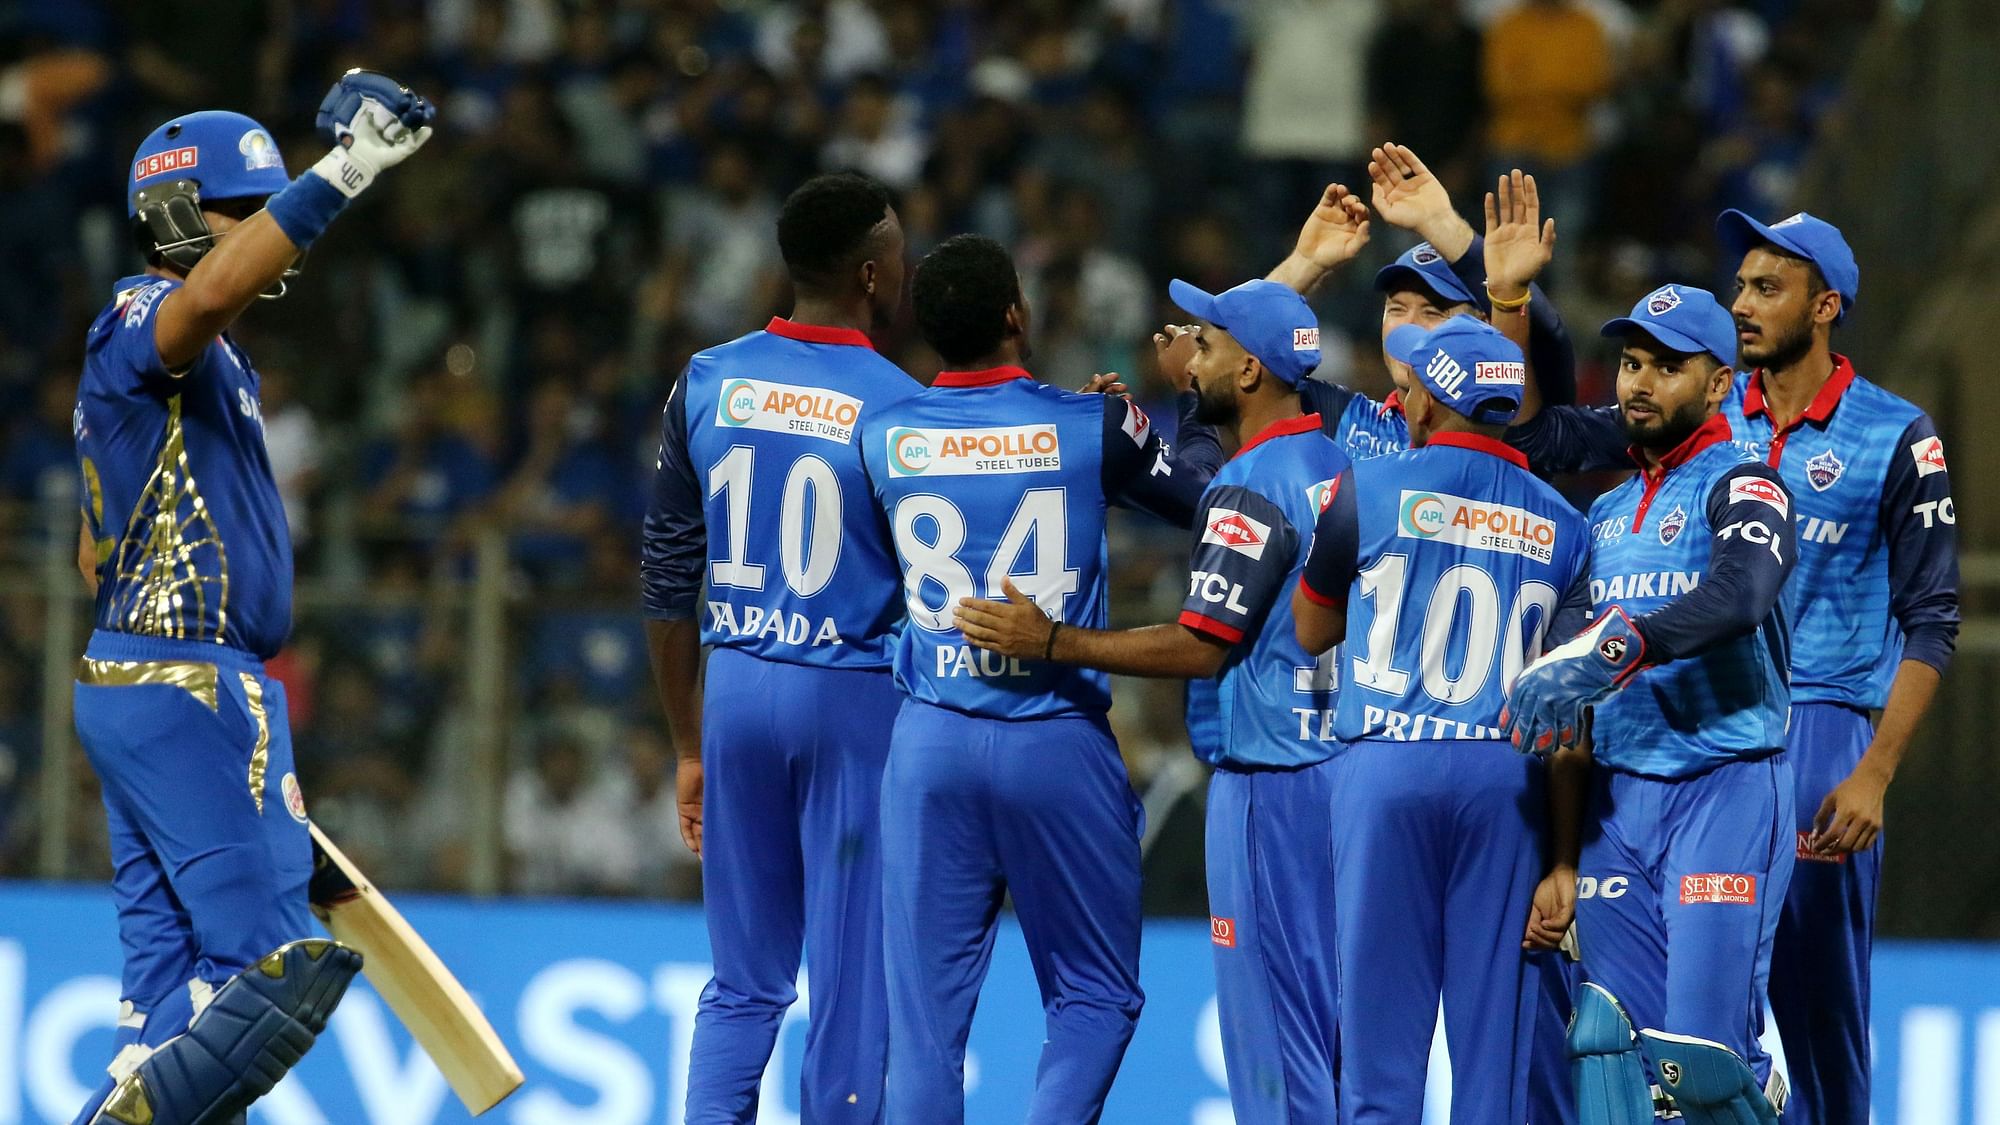 Mumbai Indians were stopped at 176 in 19.2 overs as an injured Jasprit Bumrah failed to turn up with the bat.